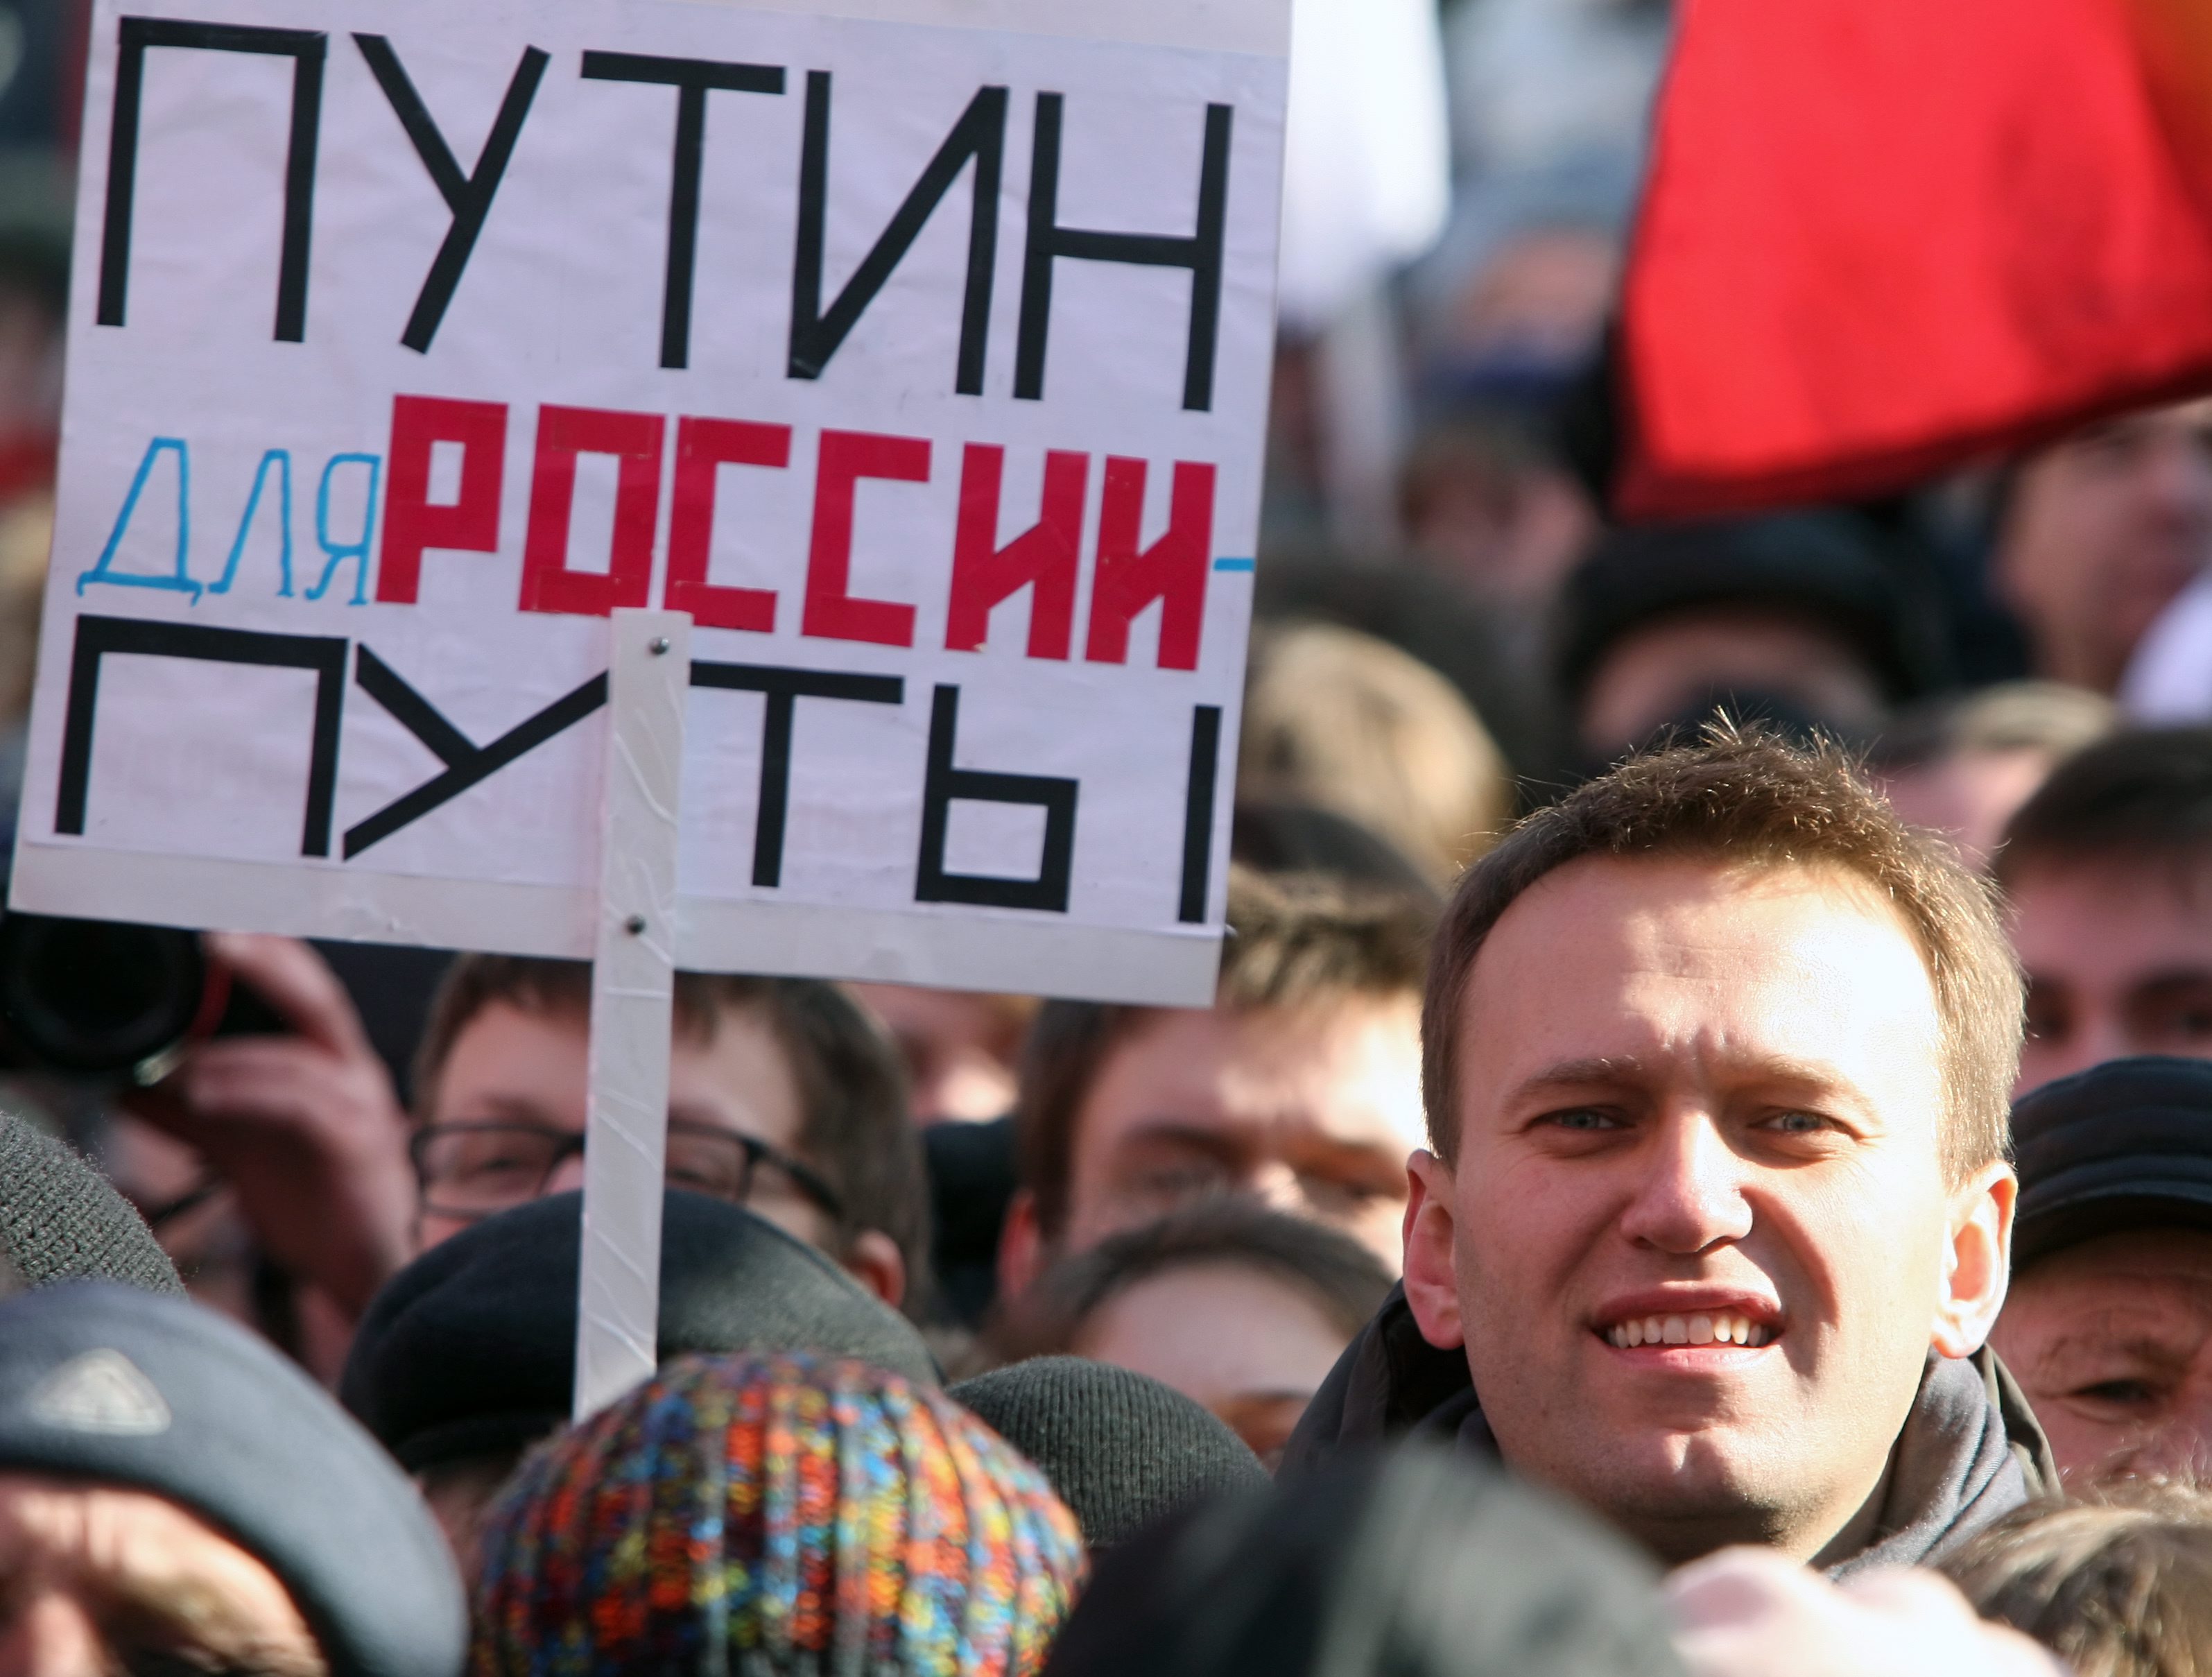 Navalny staged huge anti-Kremlin protests, frequently was imprisoned and claims to have survived multiple assassination attempts